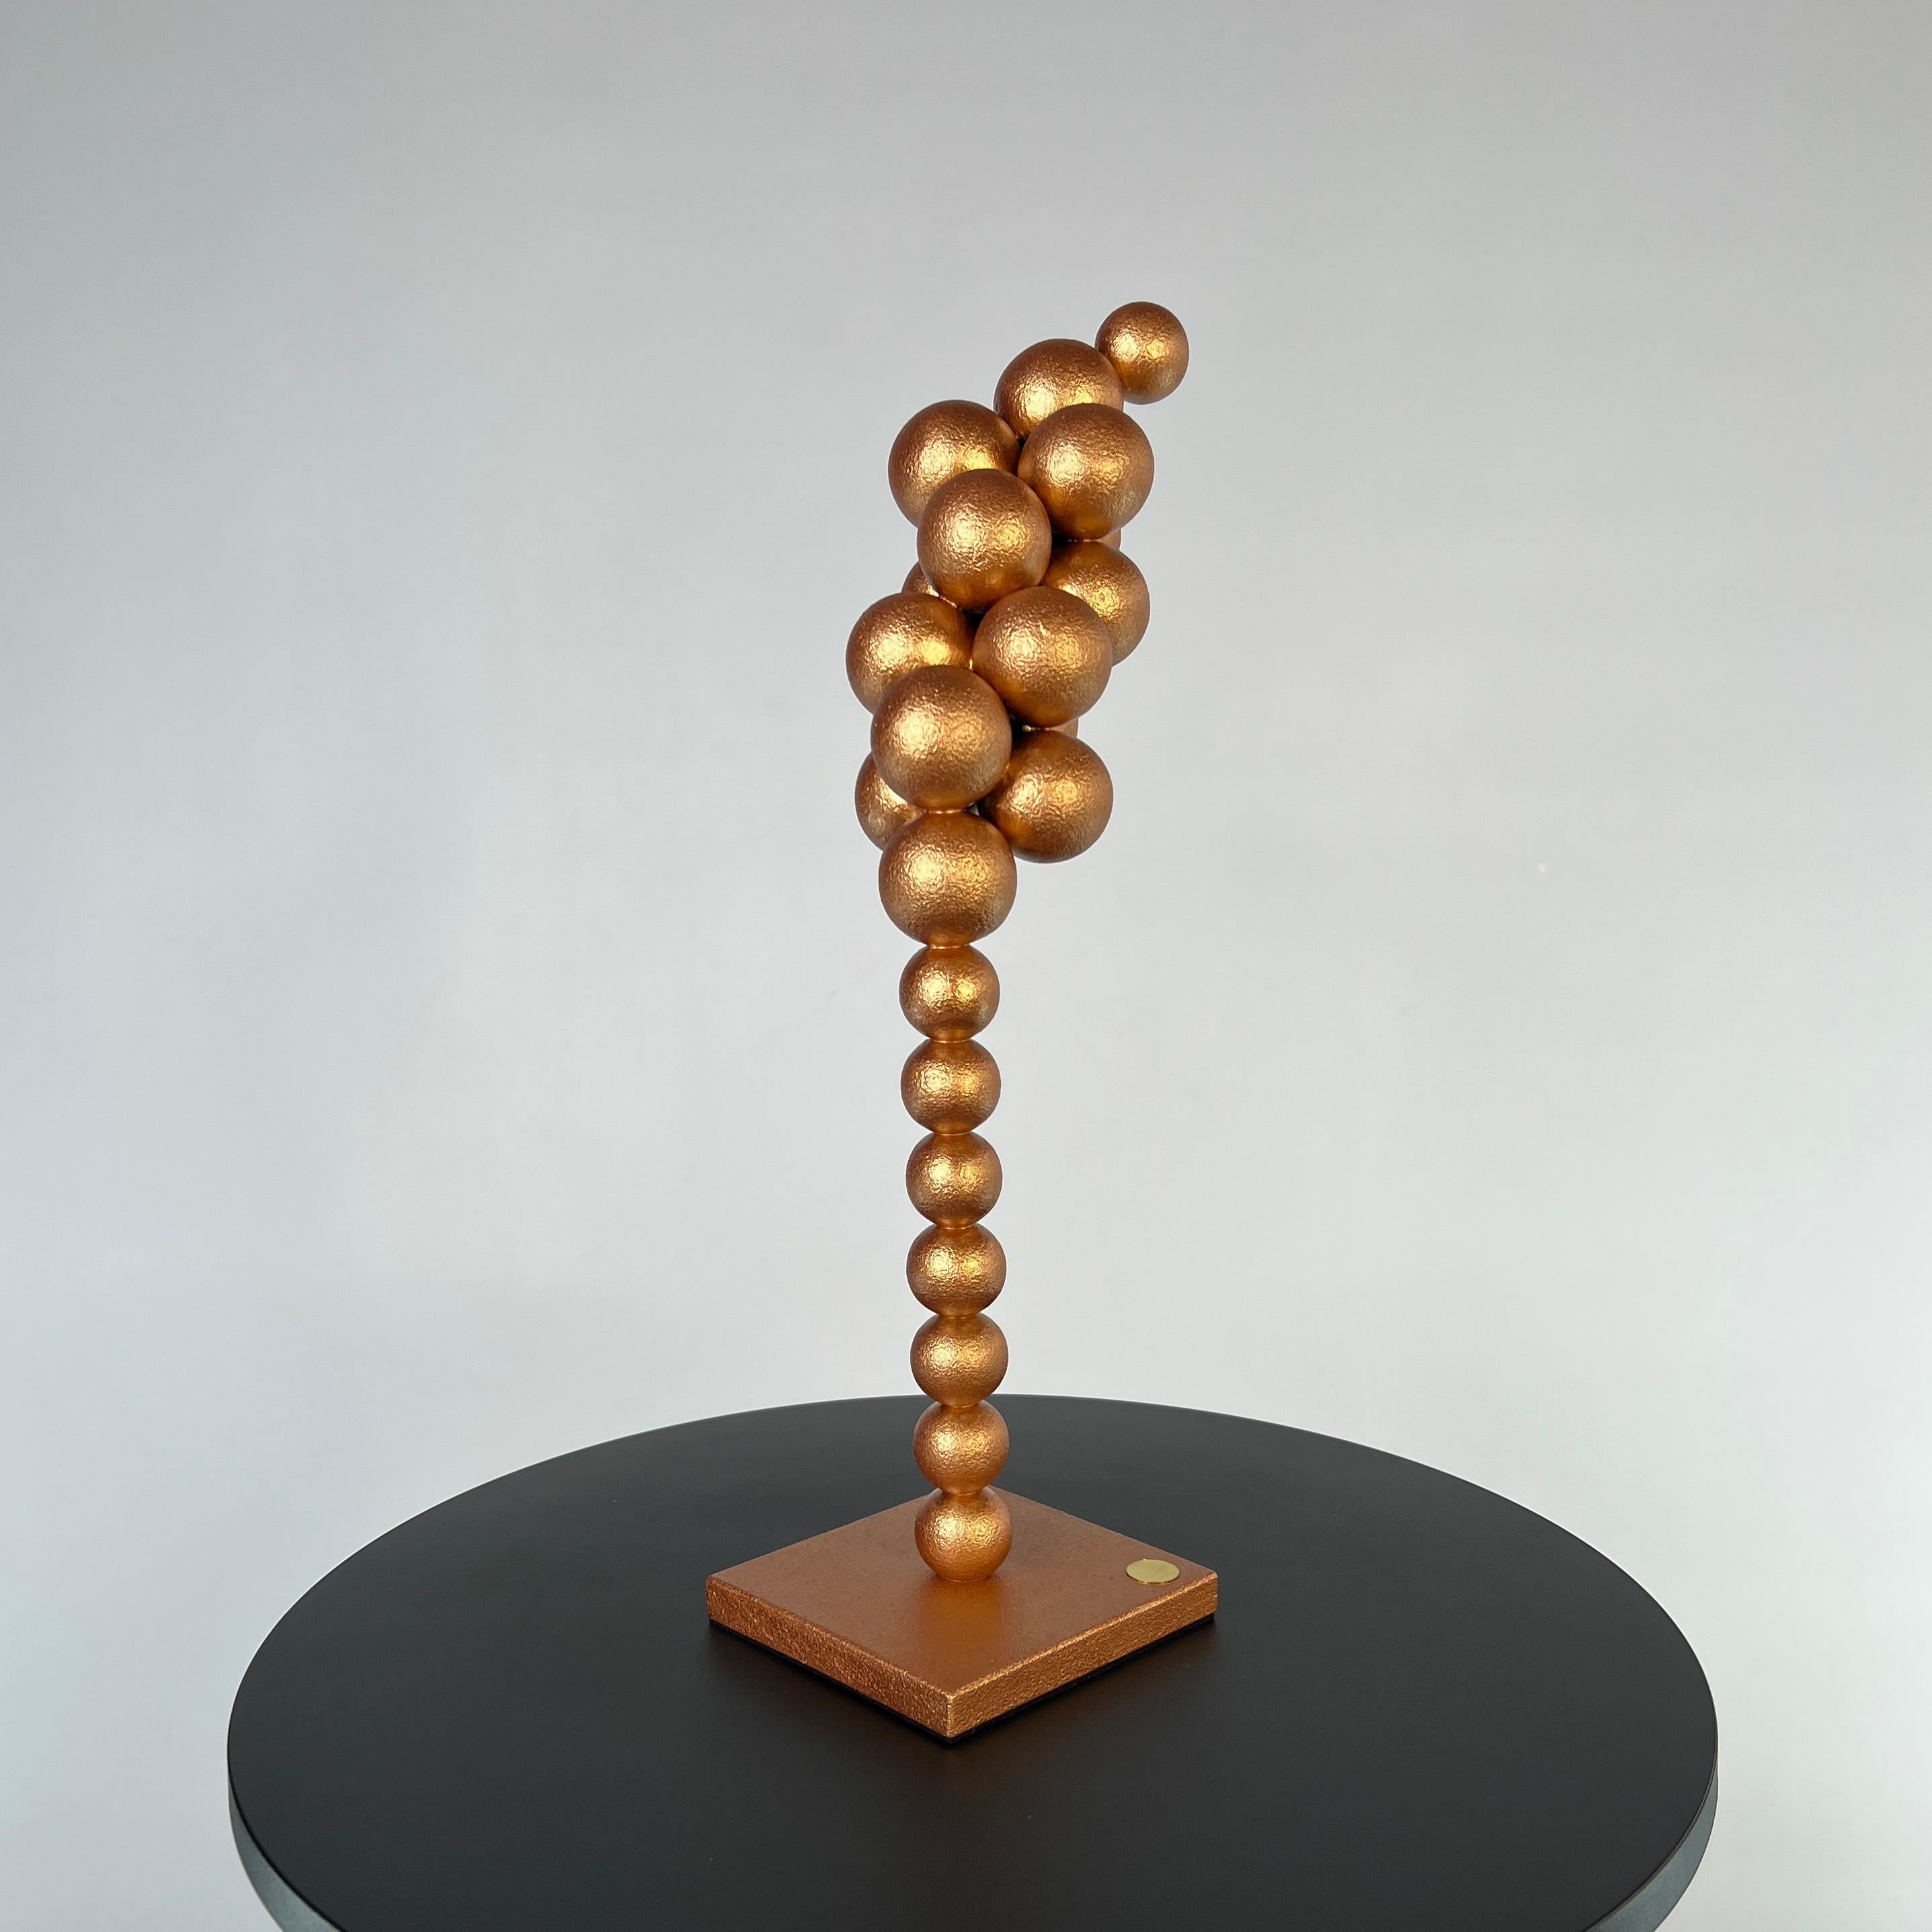 Made in Spain, 2024.
Pure symbolism makes this series of sculptures ideal for table or floor-pedestal installation in the office, bedroom, cabinet, reception, or hall.

Location and Delivery from Spain

Materials: wood, acrylic, varnish
Size:
15 x